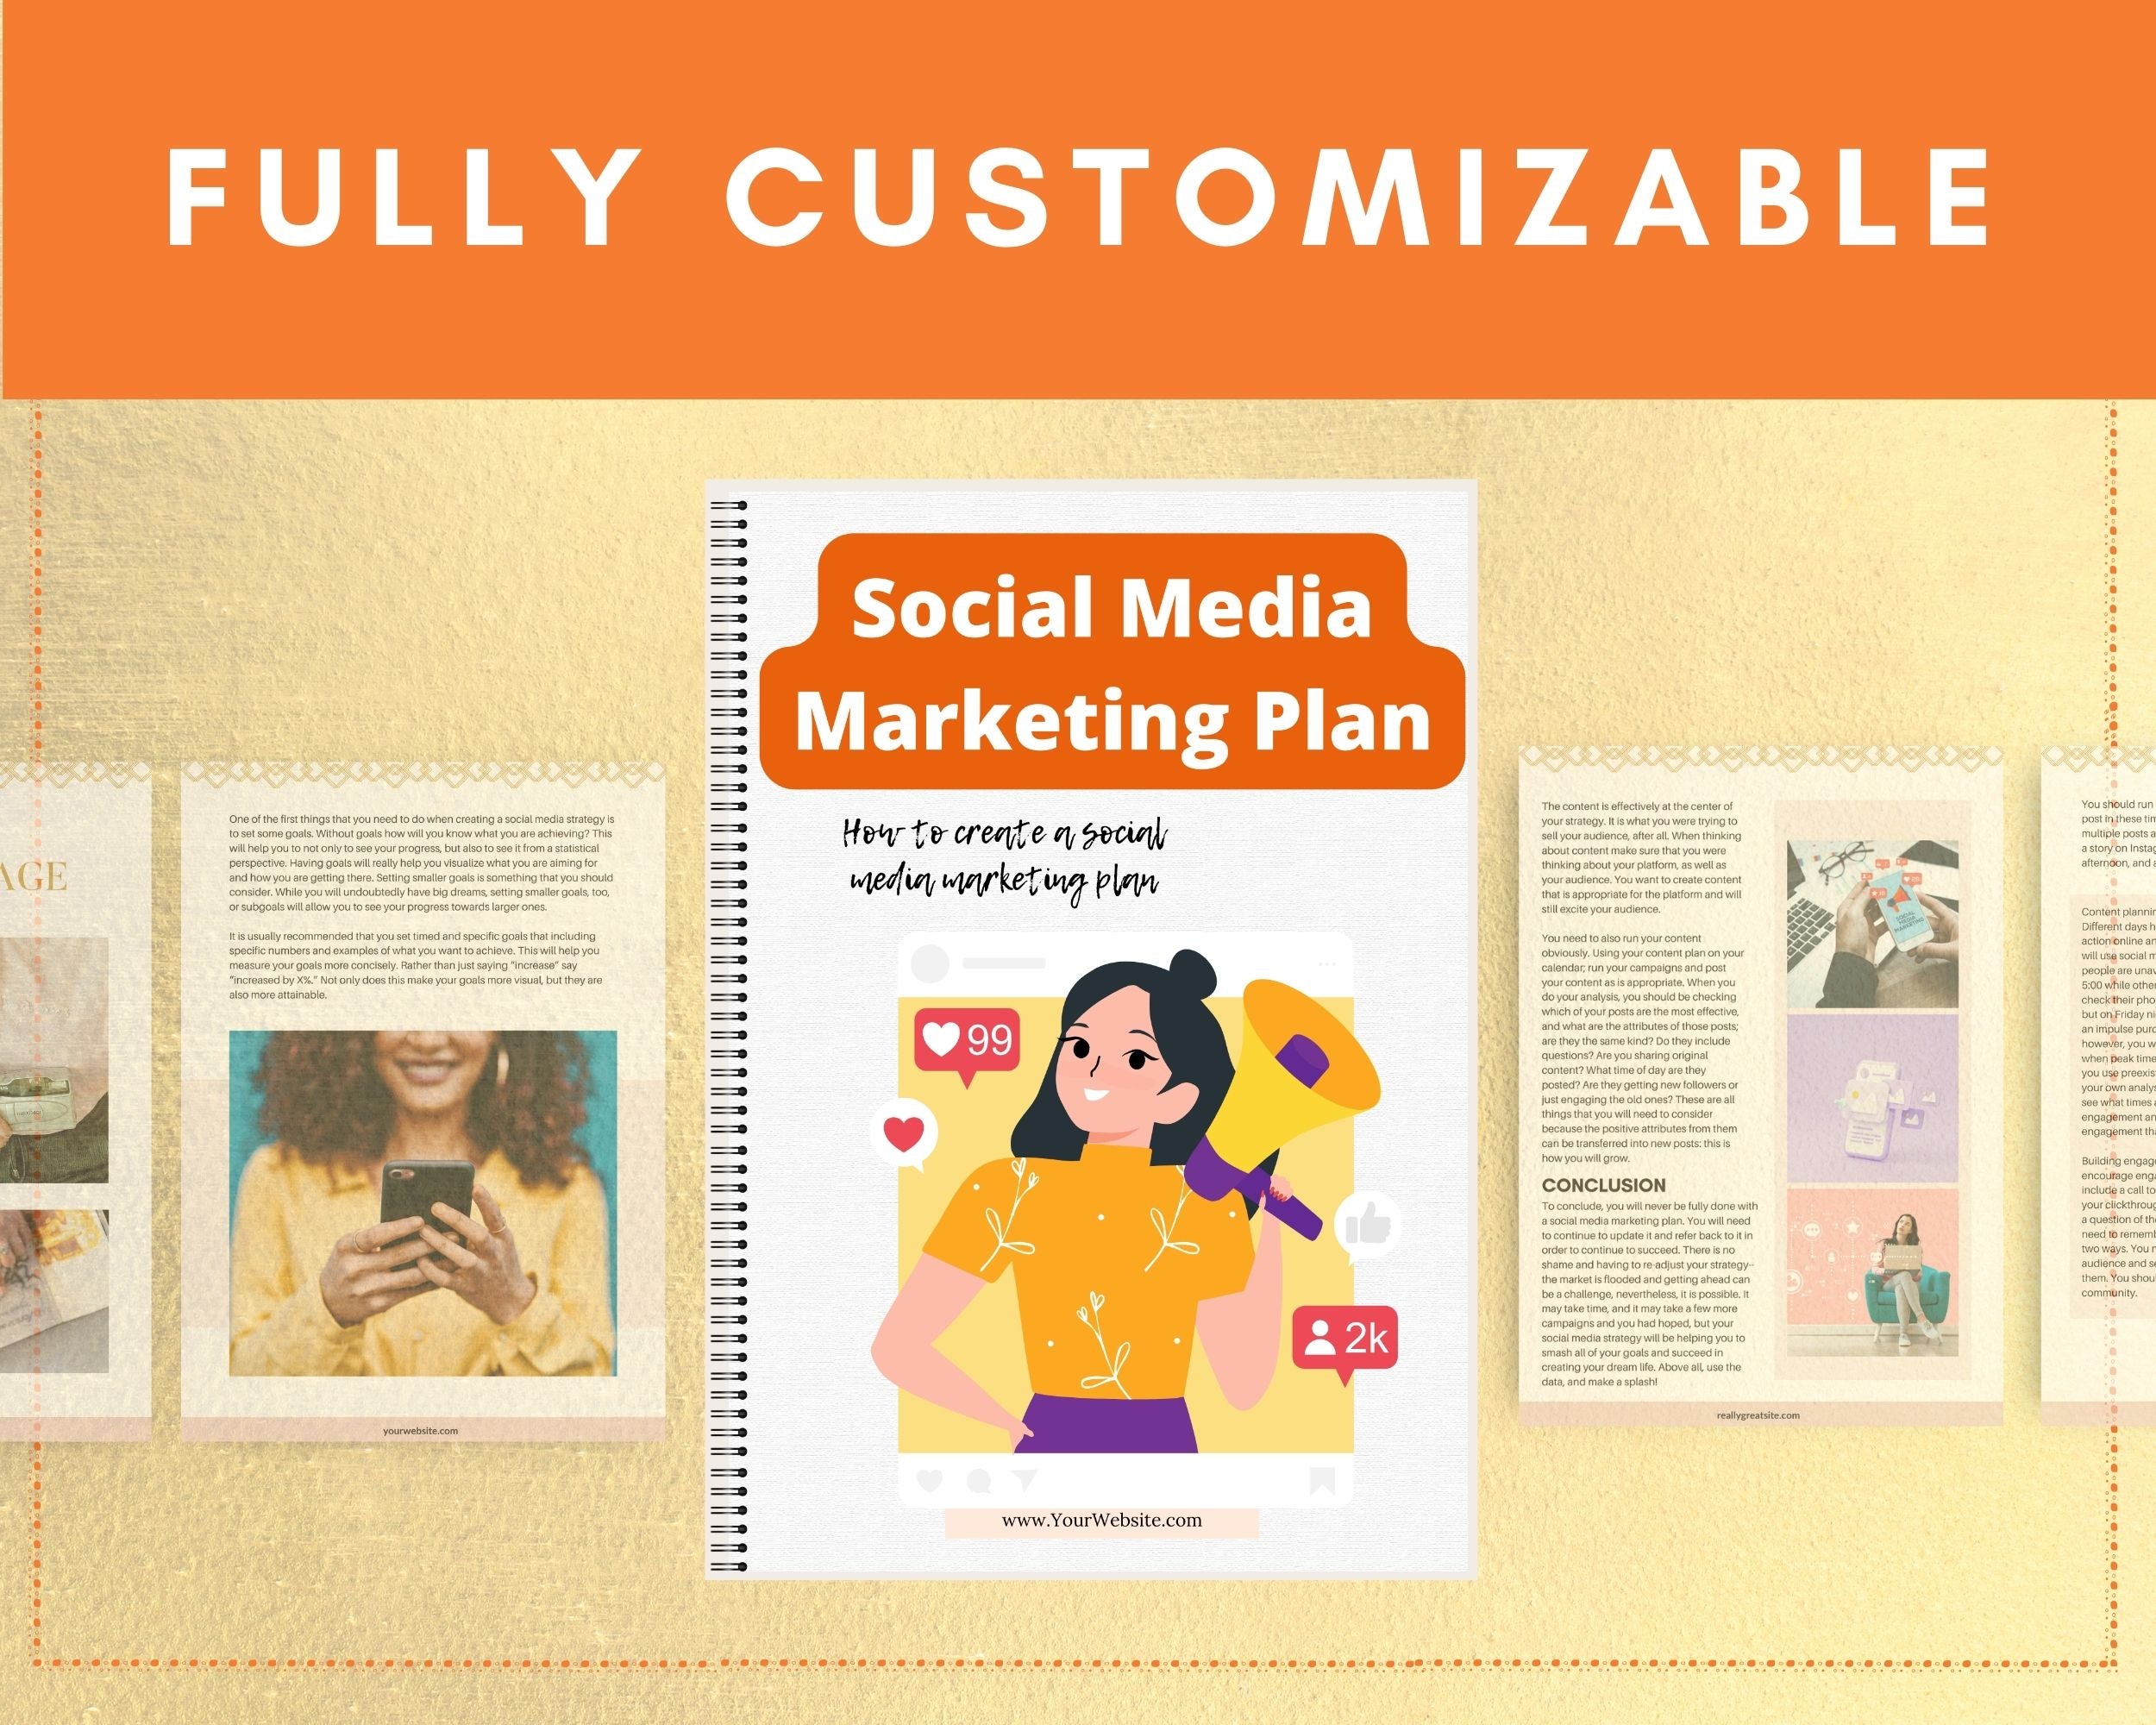 Editable Social Media Marketing Plan Mini Ebook | Done-for-You Ebook in Canva | Rebrandable and Resizable Canva Template